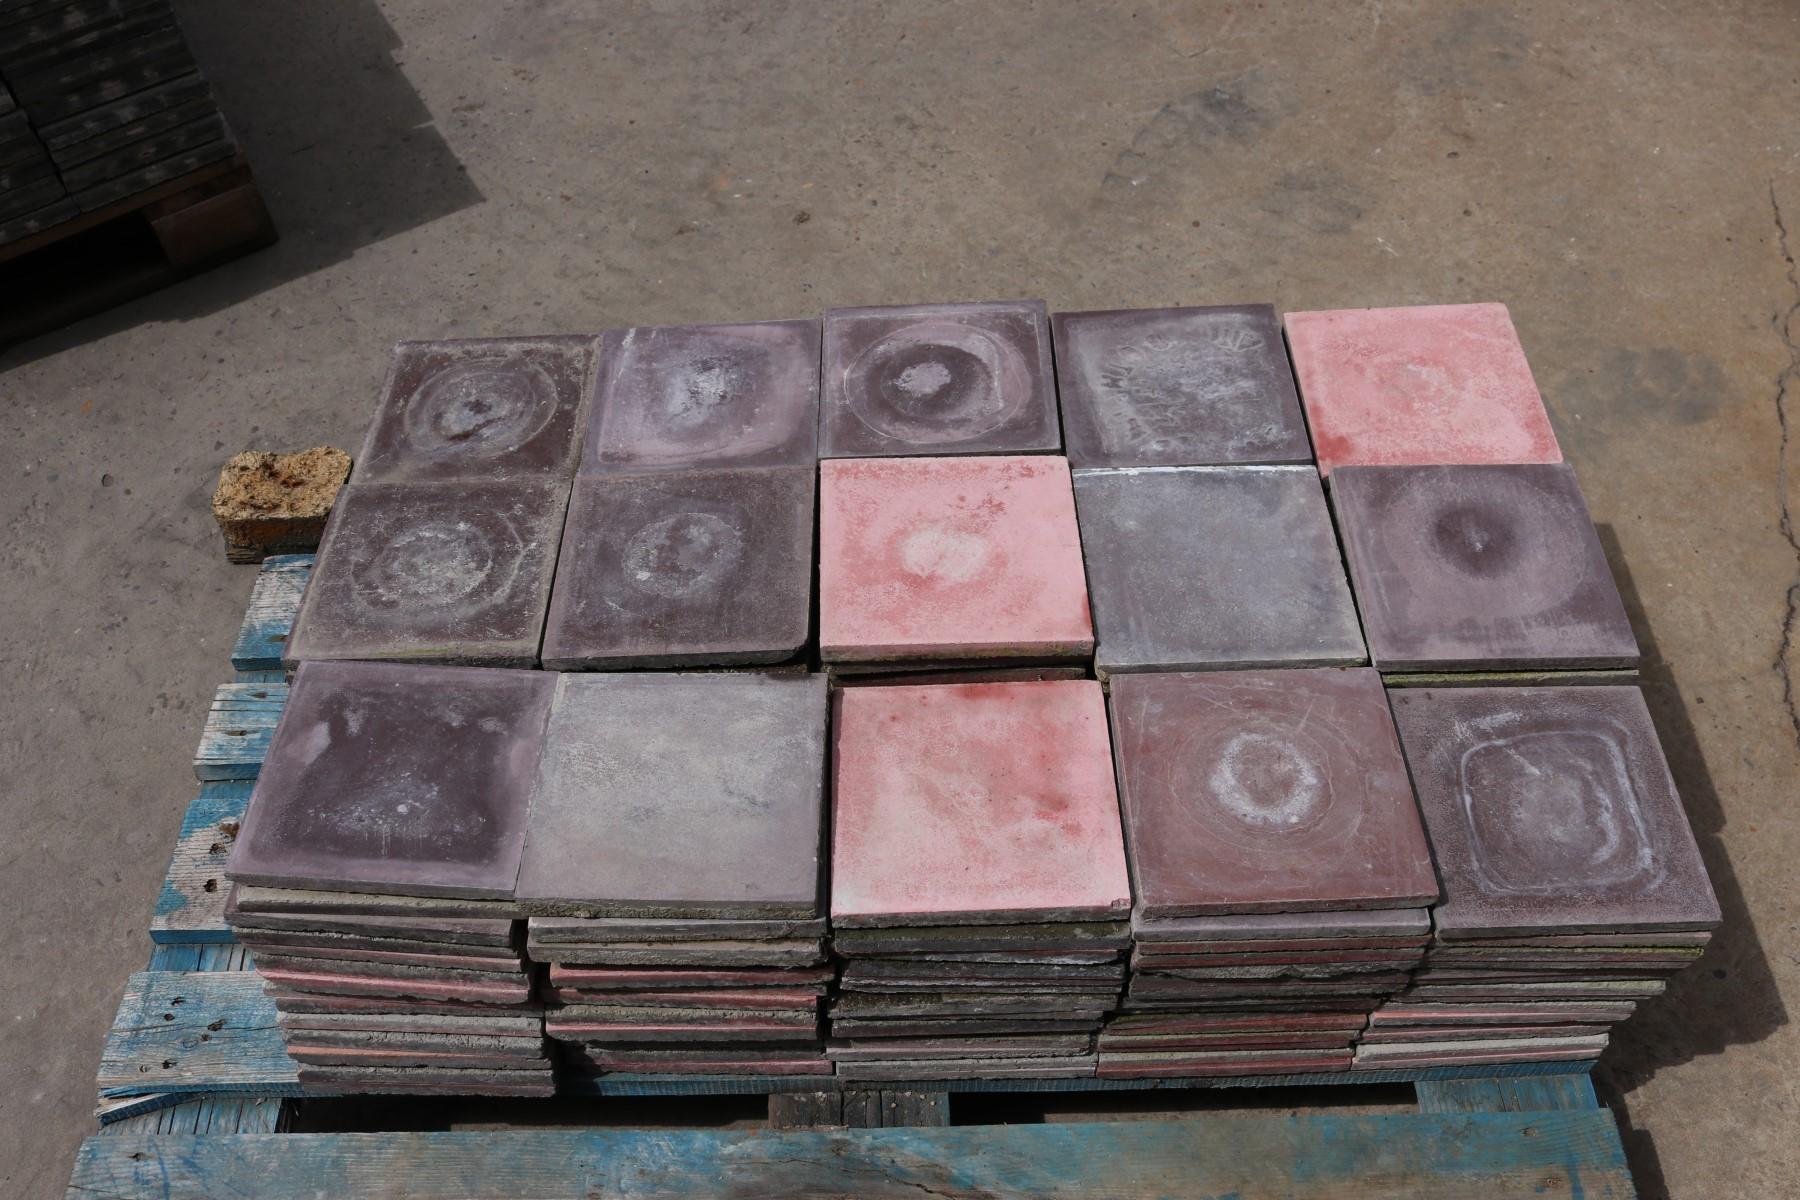 A batch of 210 reclaimed encaustic cement floor or wall tiles. These tiles will cover 8.4 m2 or 90 ft2.

Mixed shades of purple and pink, raging from very pale to very dark.

Reclaimed tiles. Colours vary from pale pink shades to vivid purple.